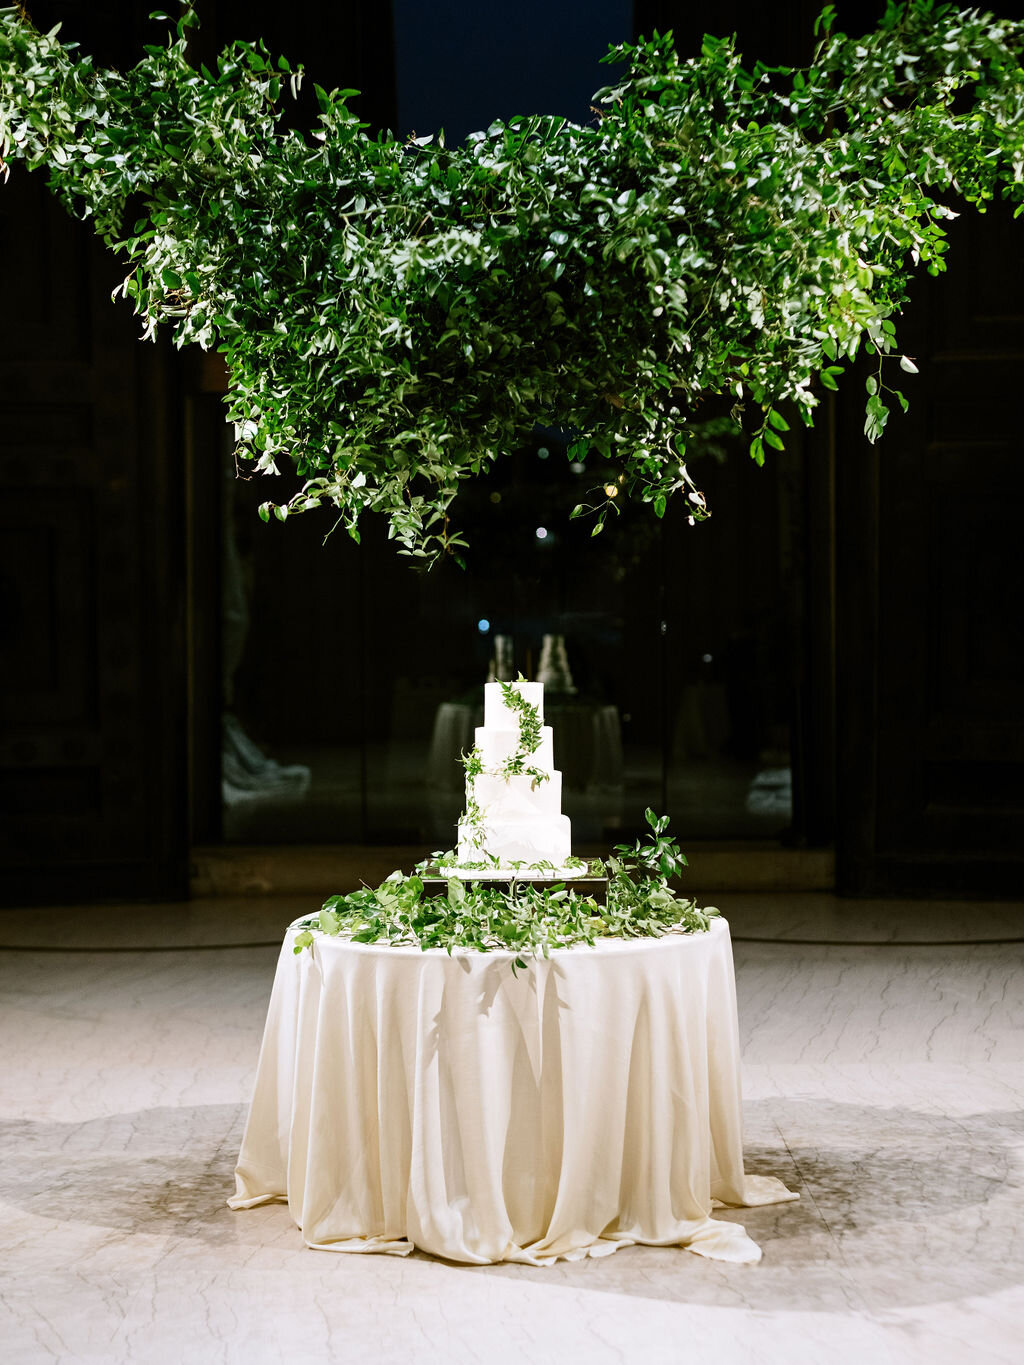 Dramatic cake table setting with lush vine and greenery installation hanging and delicate jasmine vines on the cake. Nashville wedding floral design at the Parthenon.